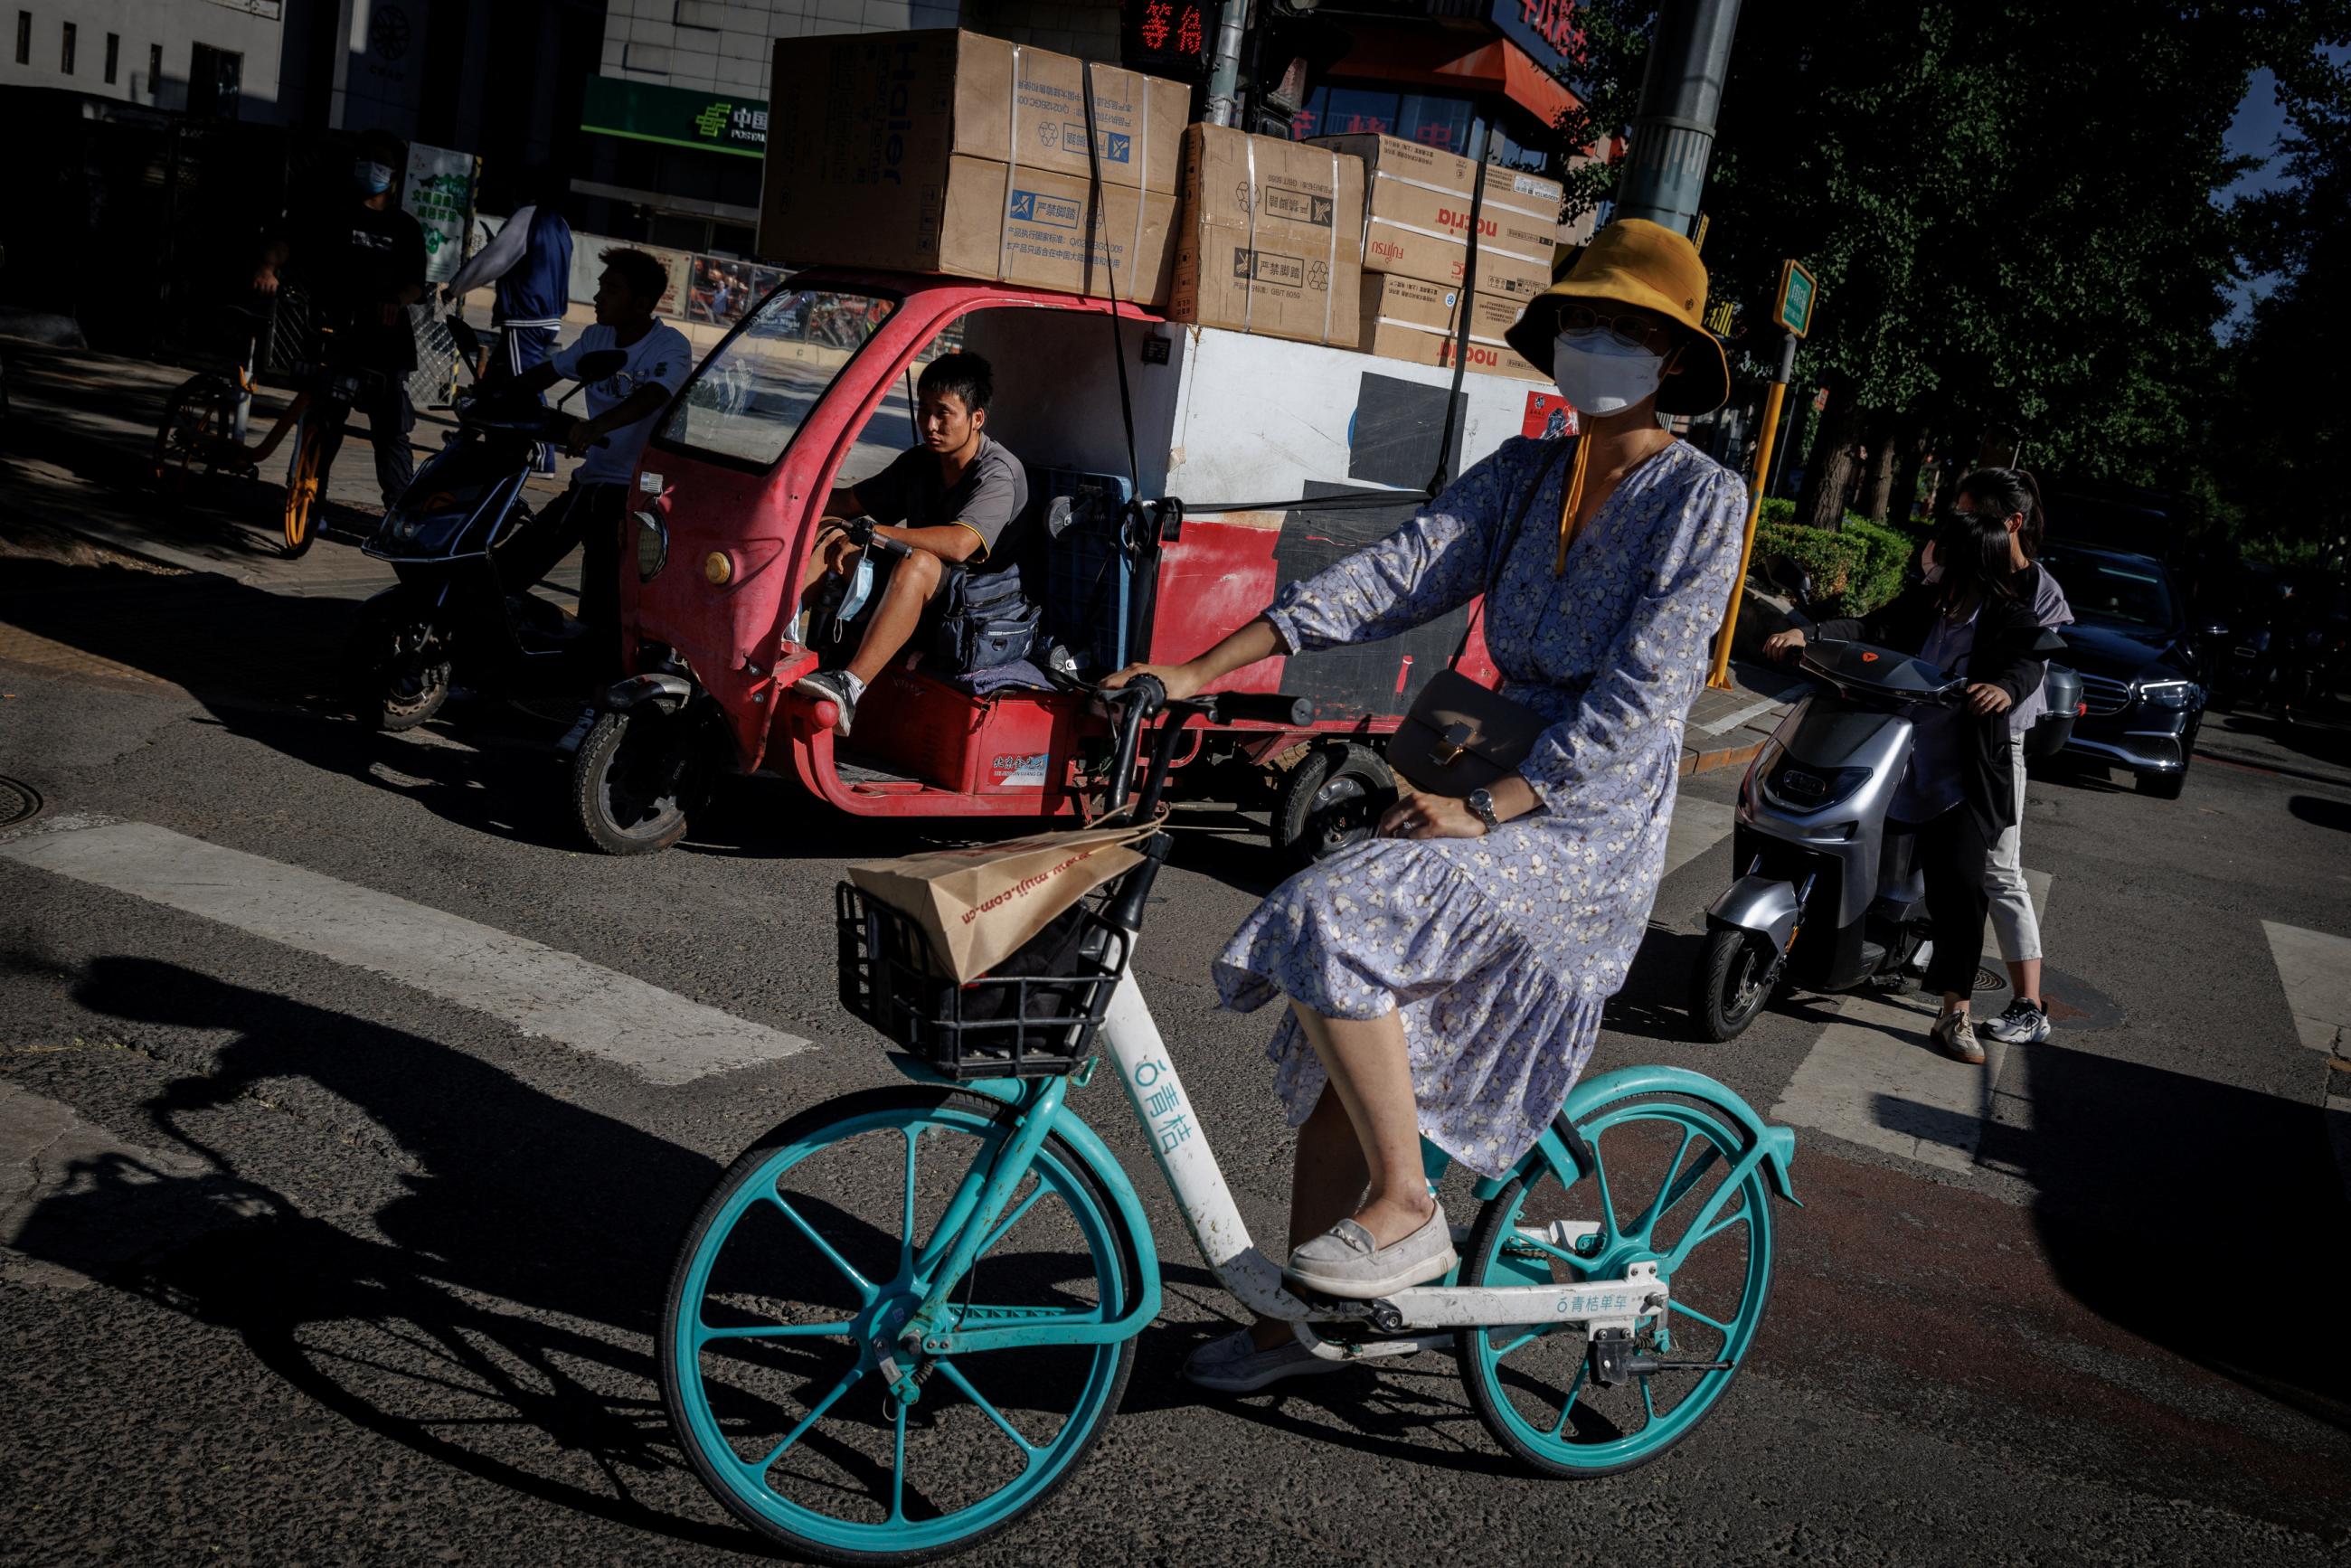 A woman on an aqua-colored bike in a dress and sneakers waits with people at a traffic light in Beijing, China, on July 14, 2022. 